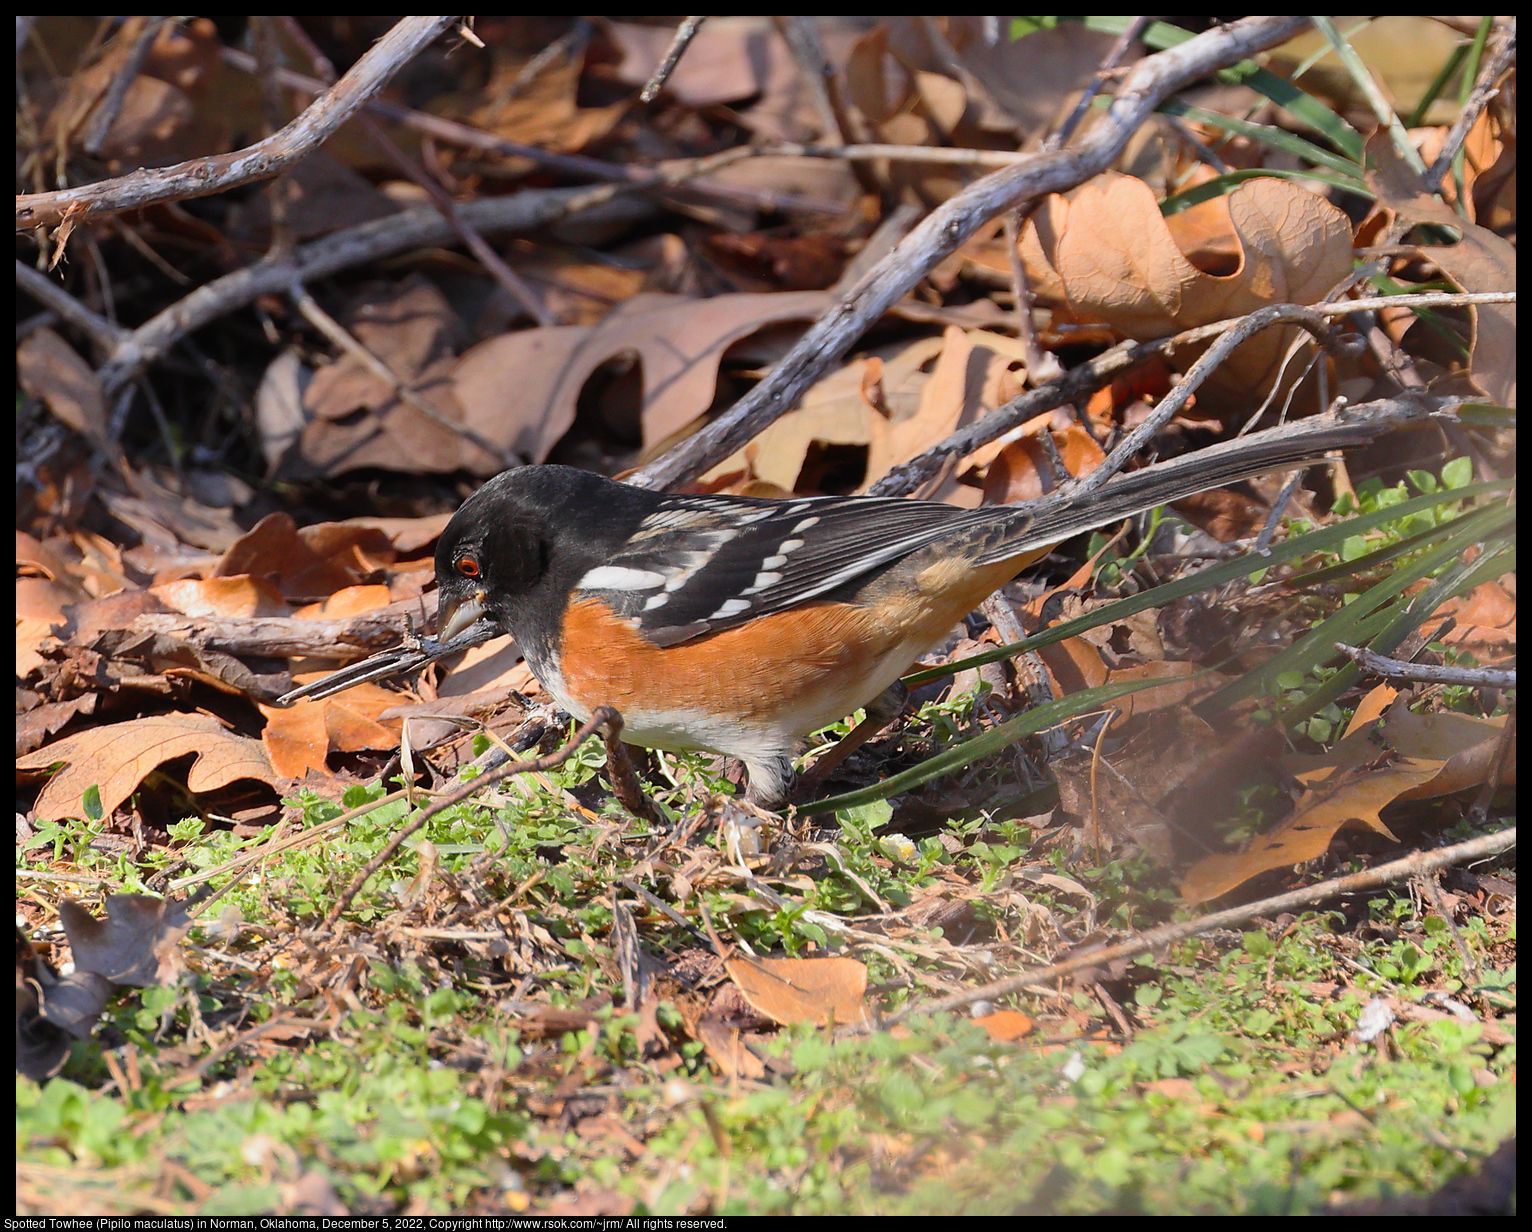 Spotted Towhee (Pipilo maculatus)) in Norman, Oklahoma, December 5, 2022